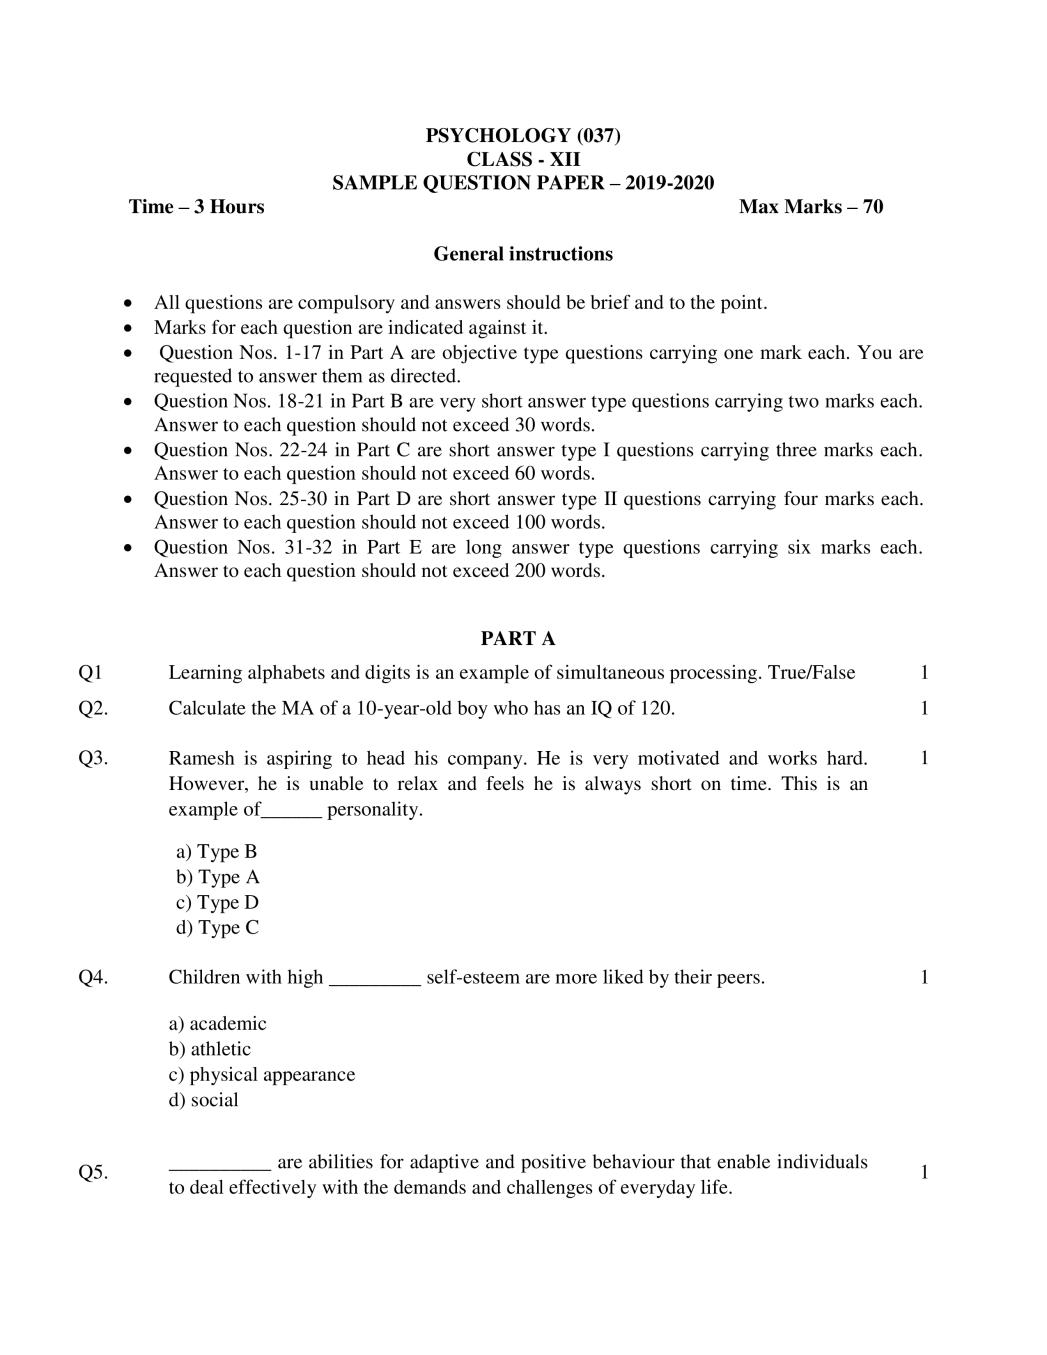 CBSE Class 12 Sample Paper 2020 for Psychology - Page 1